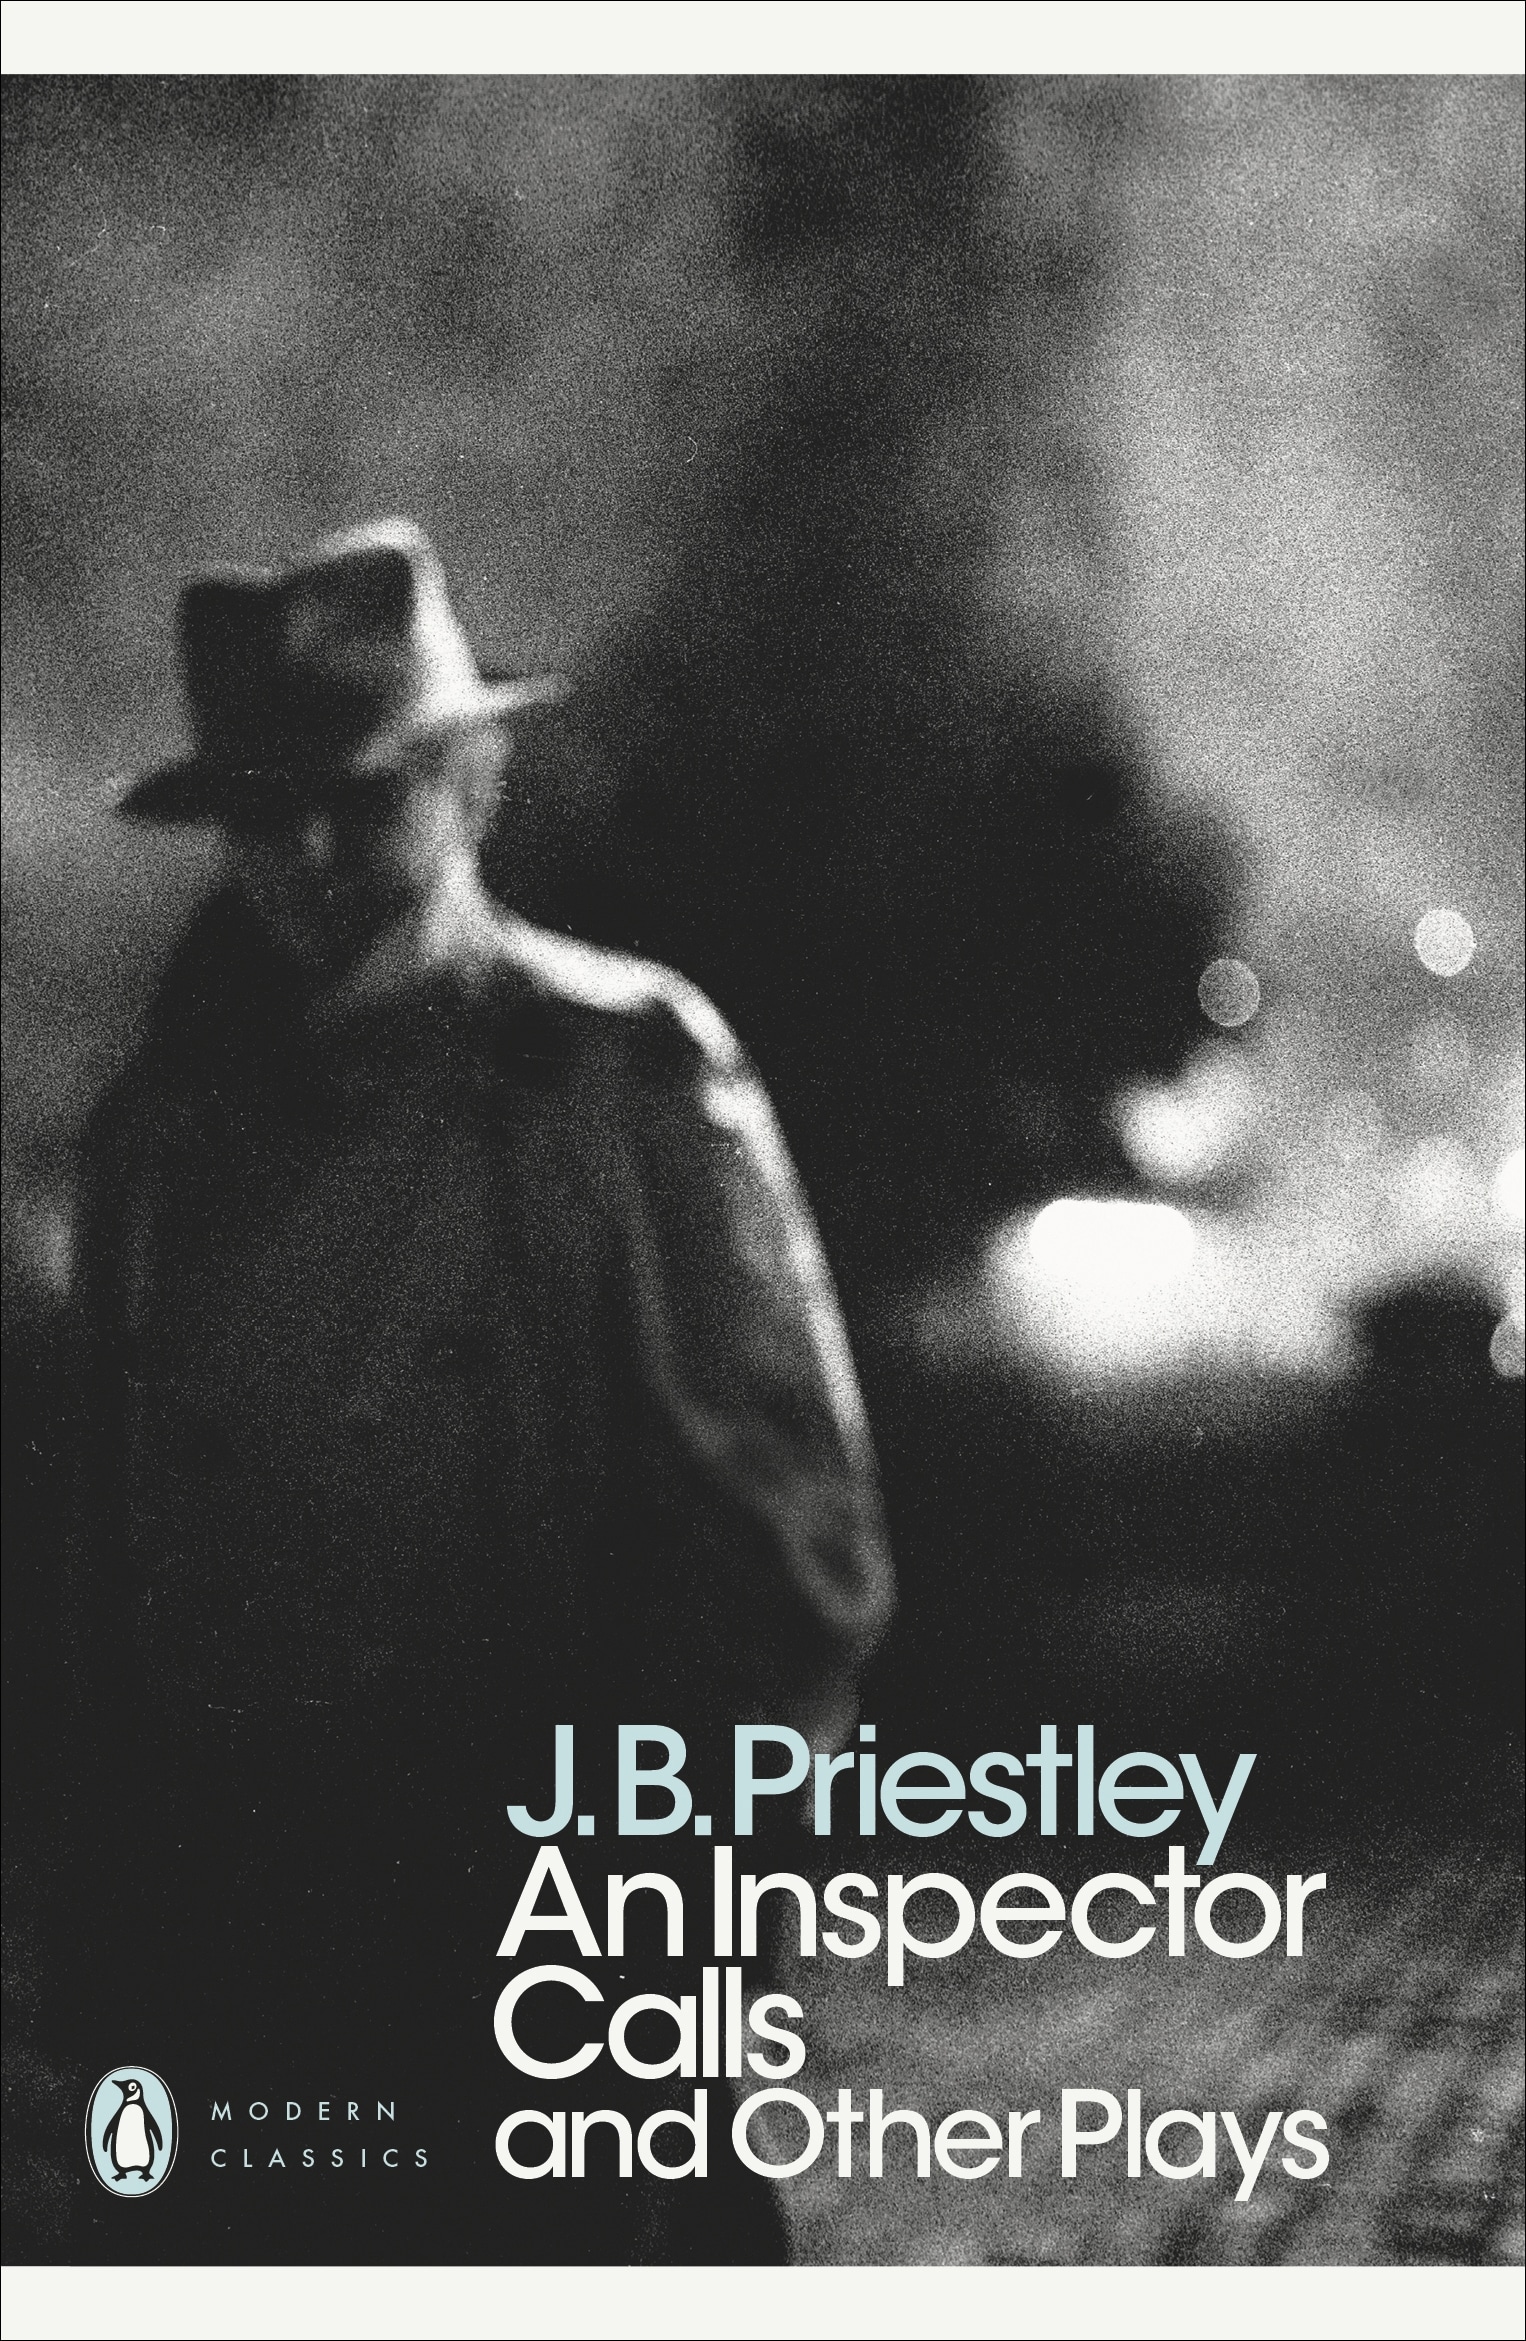 Book “An Inspector Calls and Other Plays” by J B Priestley — March 29, 2001